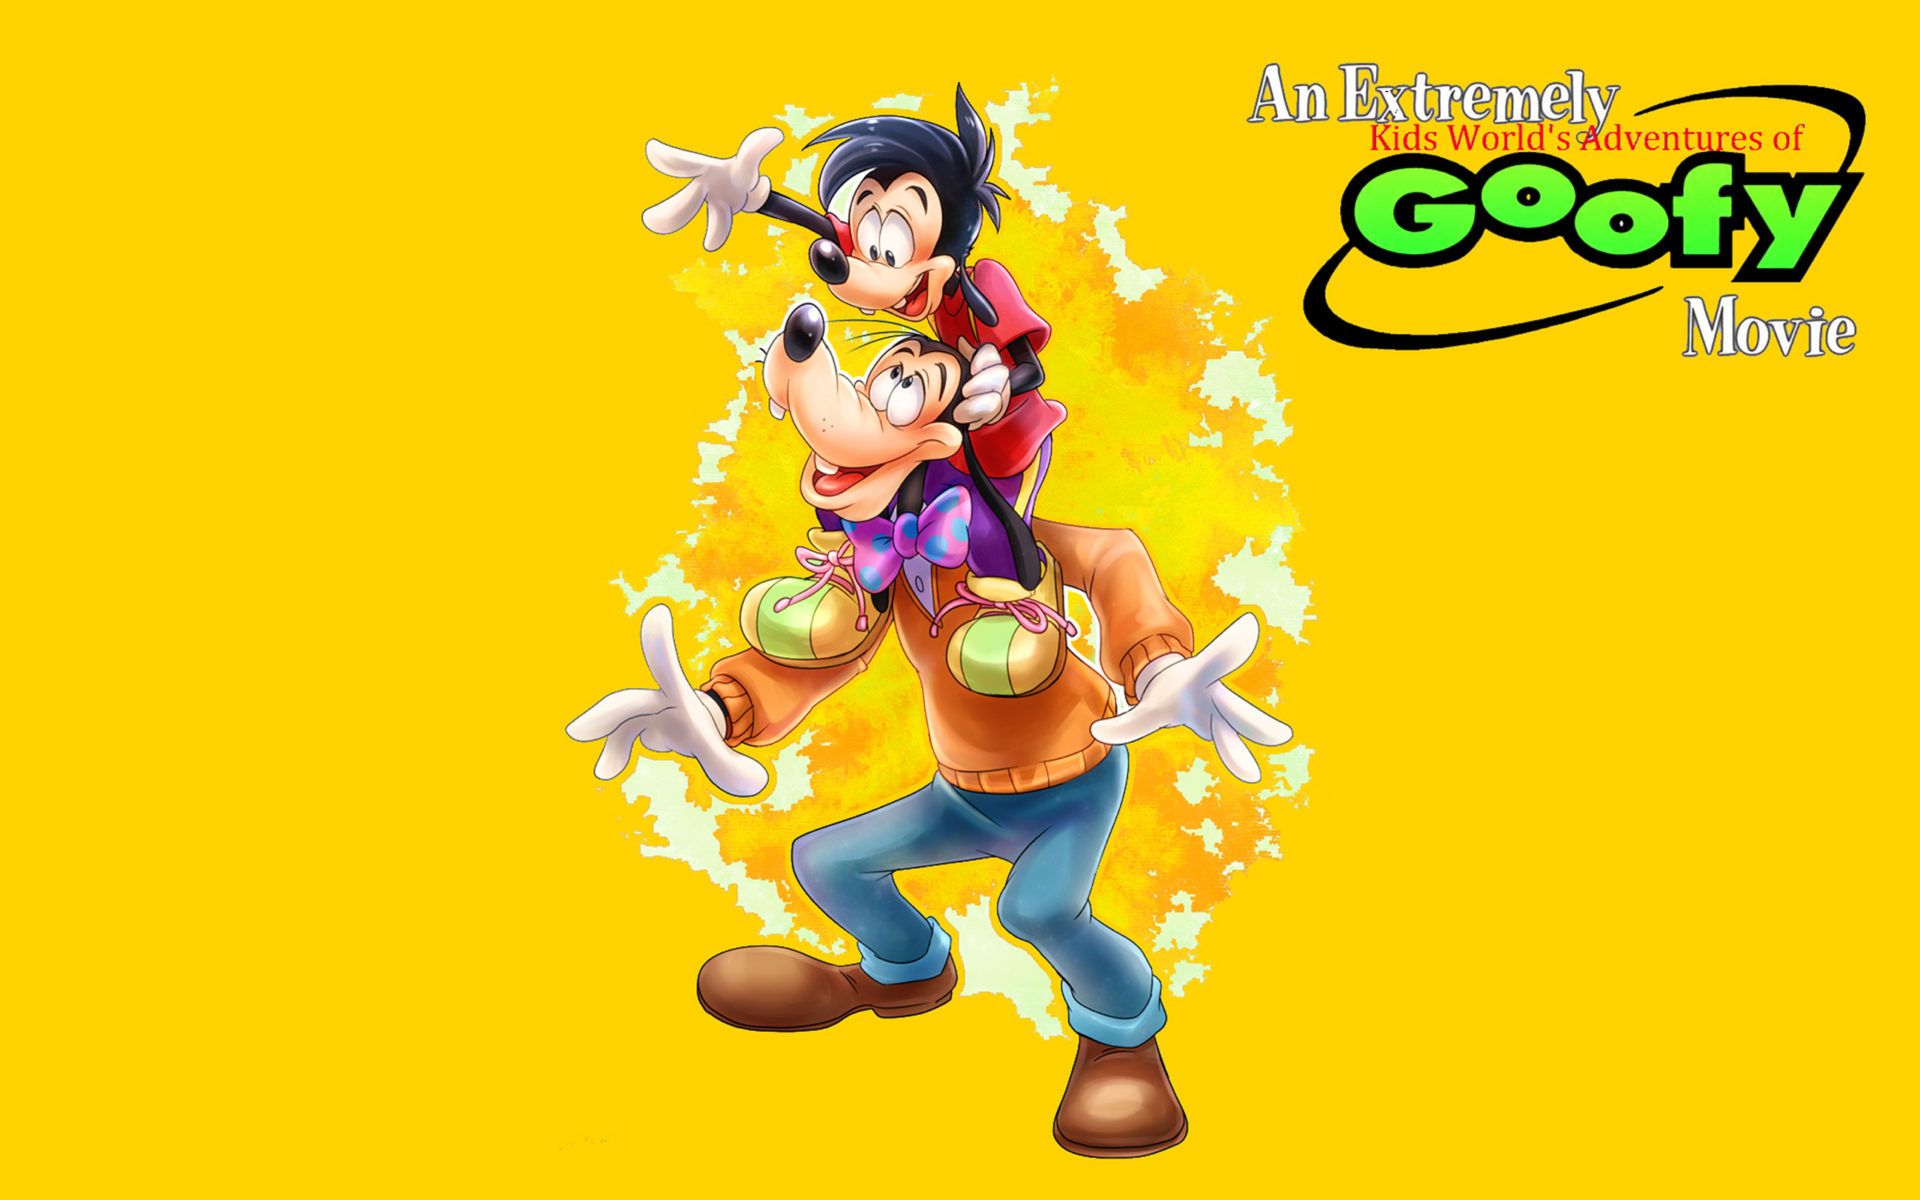 An Extremely Goofy Movie Goofy And Max Disney Cartoon Poster Wallpaper HD For Mobile Phones Tablet And Pc 2880x1620, Wallpaper13.com